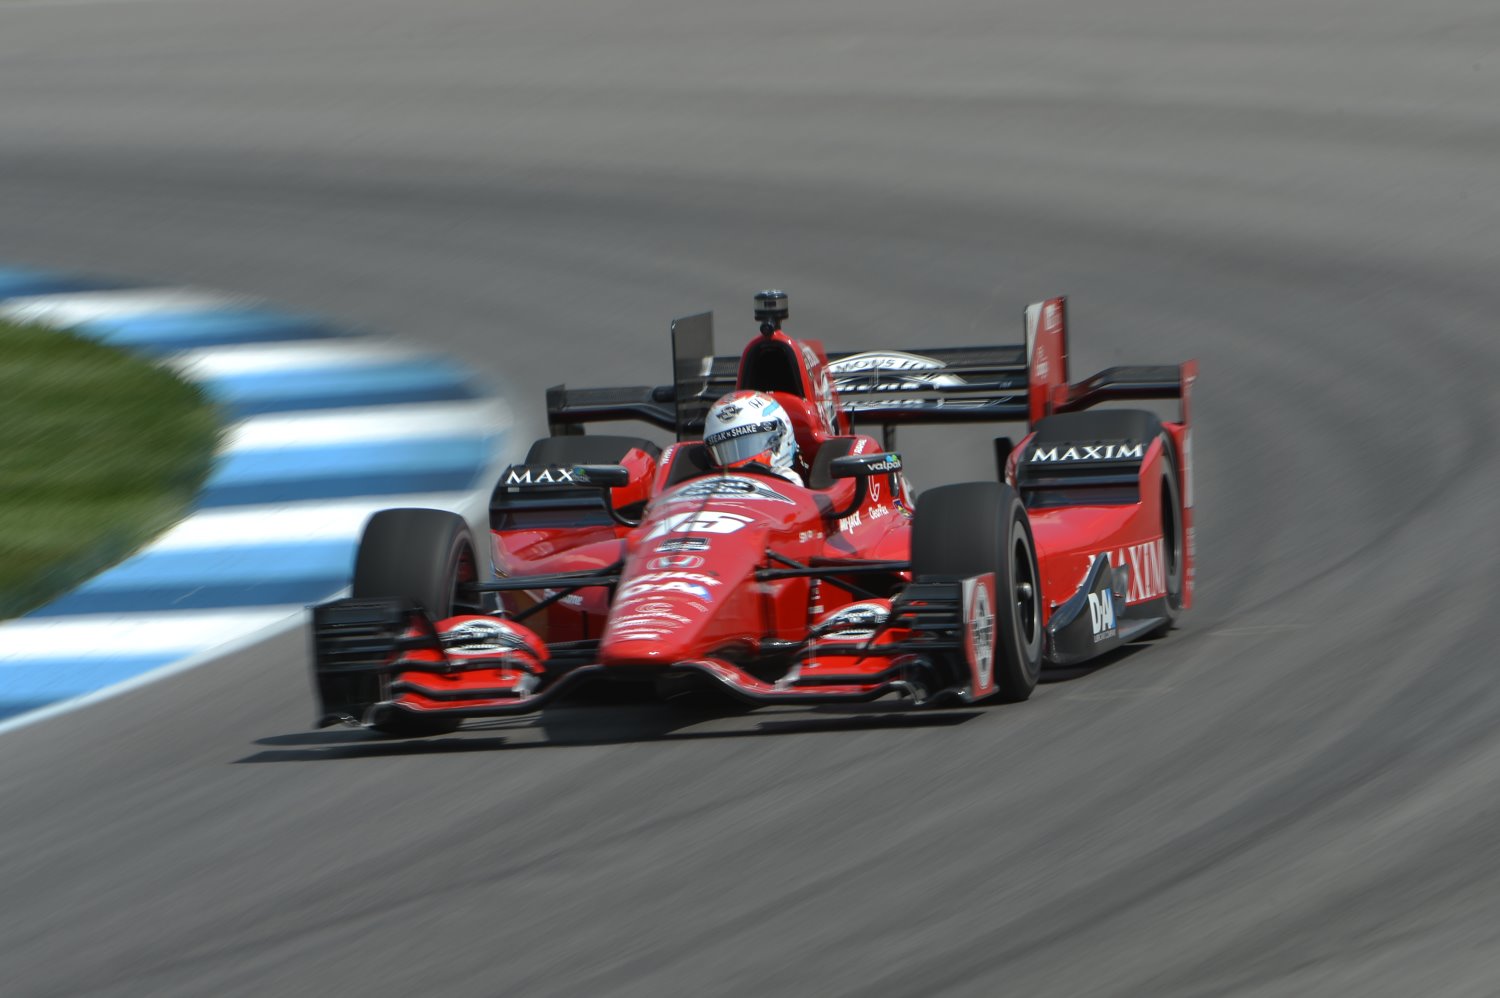 Rahal drove the best race of his career